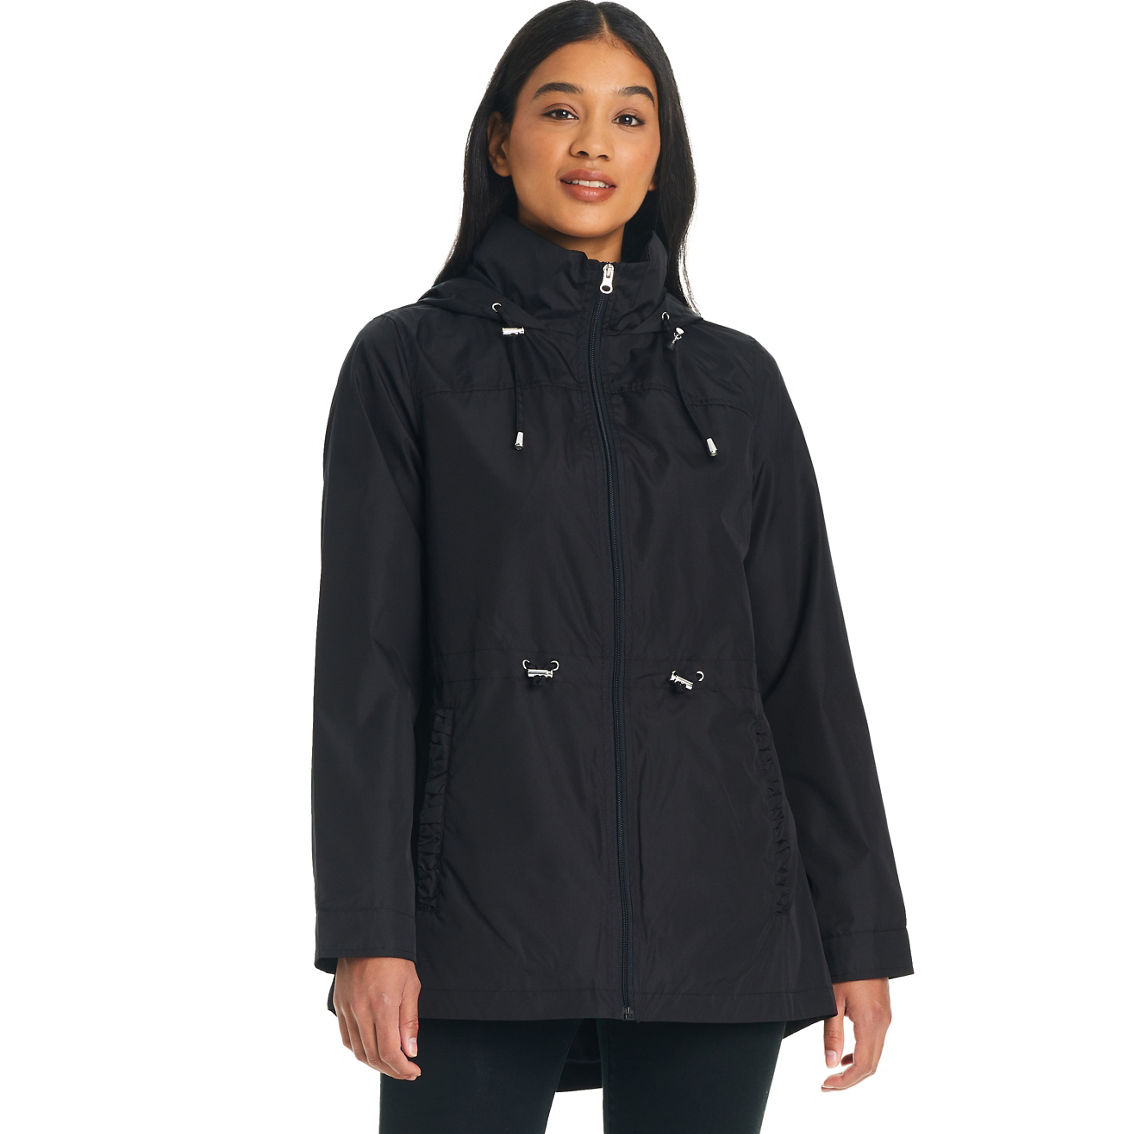 Details 30 In. Hooded Parka In A Pocket | Coats | Clothing ...